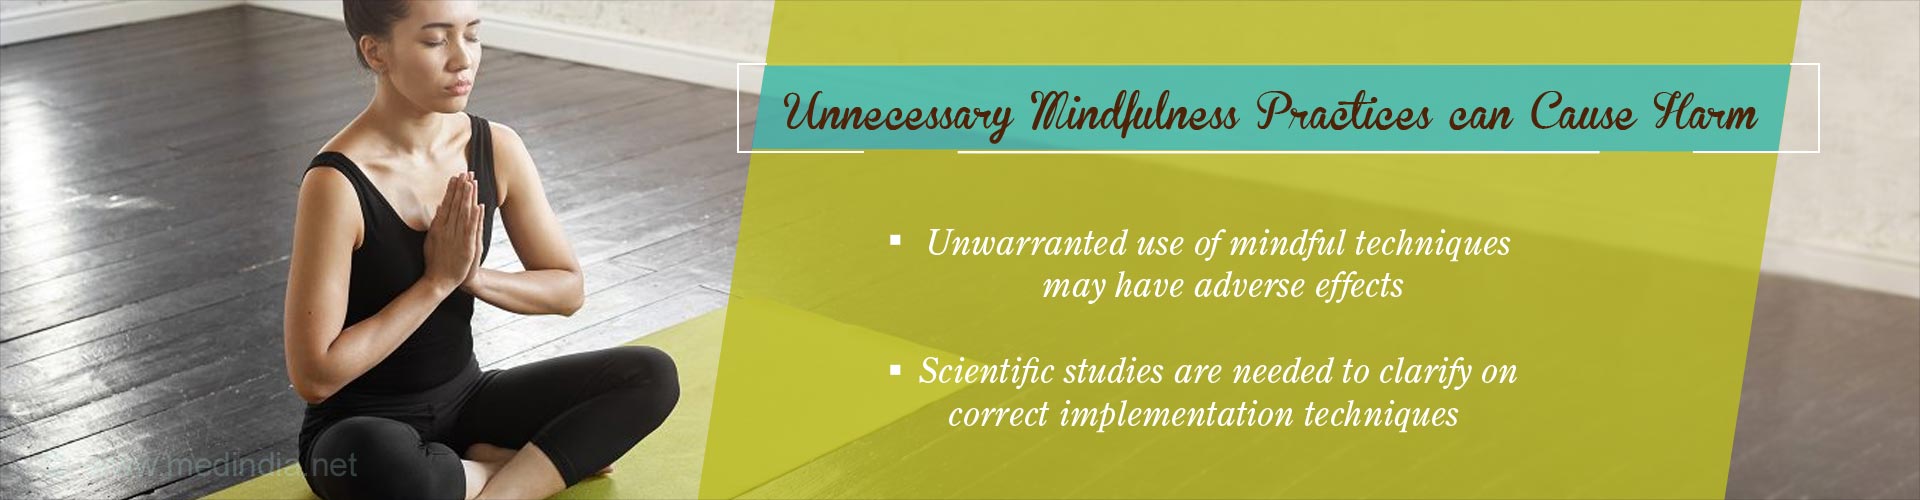 unnecessary mindfulness practices can cause harm
- Unwarranted use of mindful techniques may have adverse effects
- scientific studies are needed to clarify on correct implementation techniques